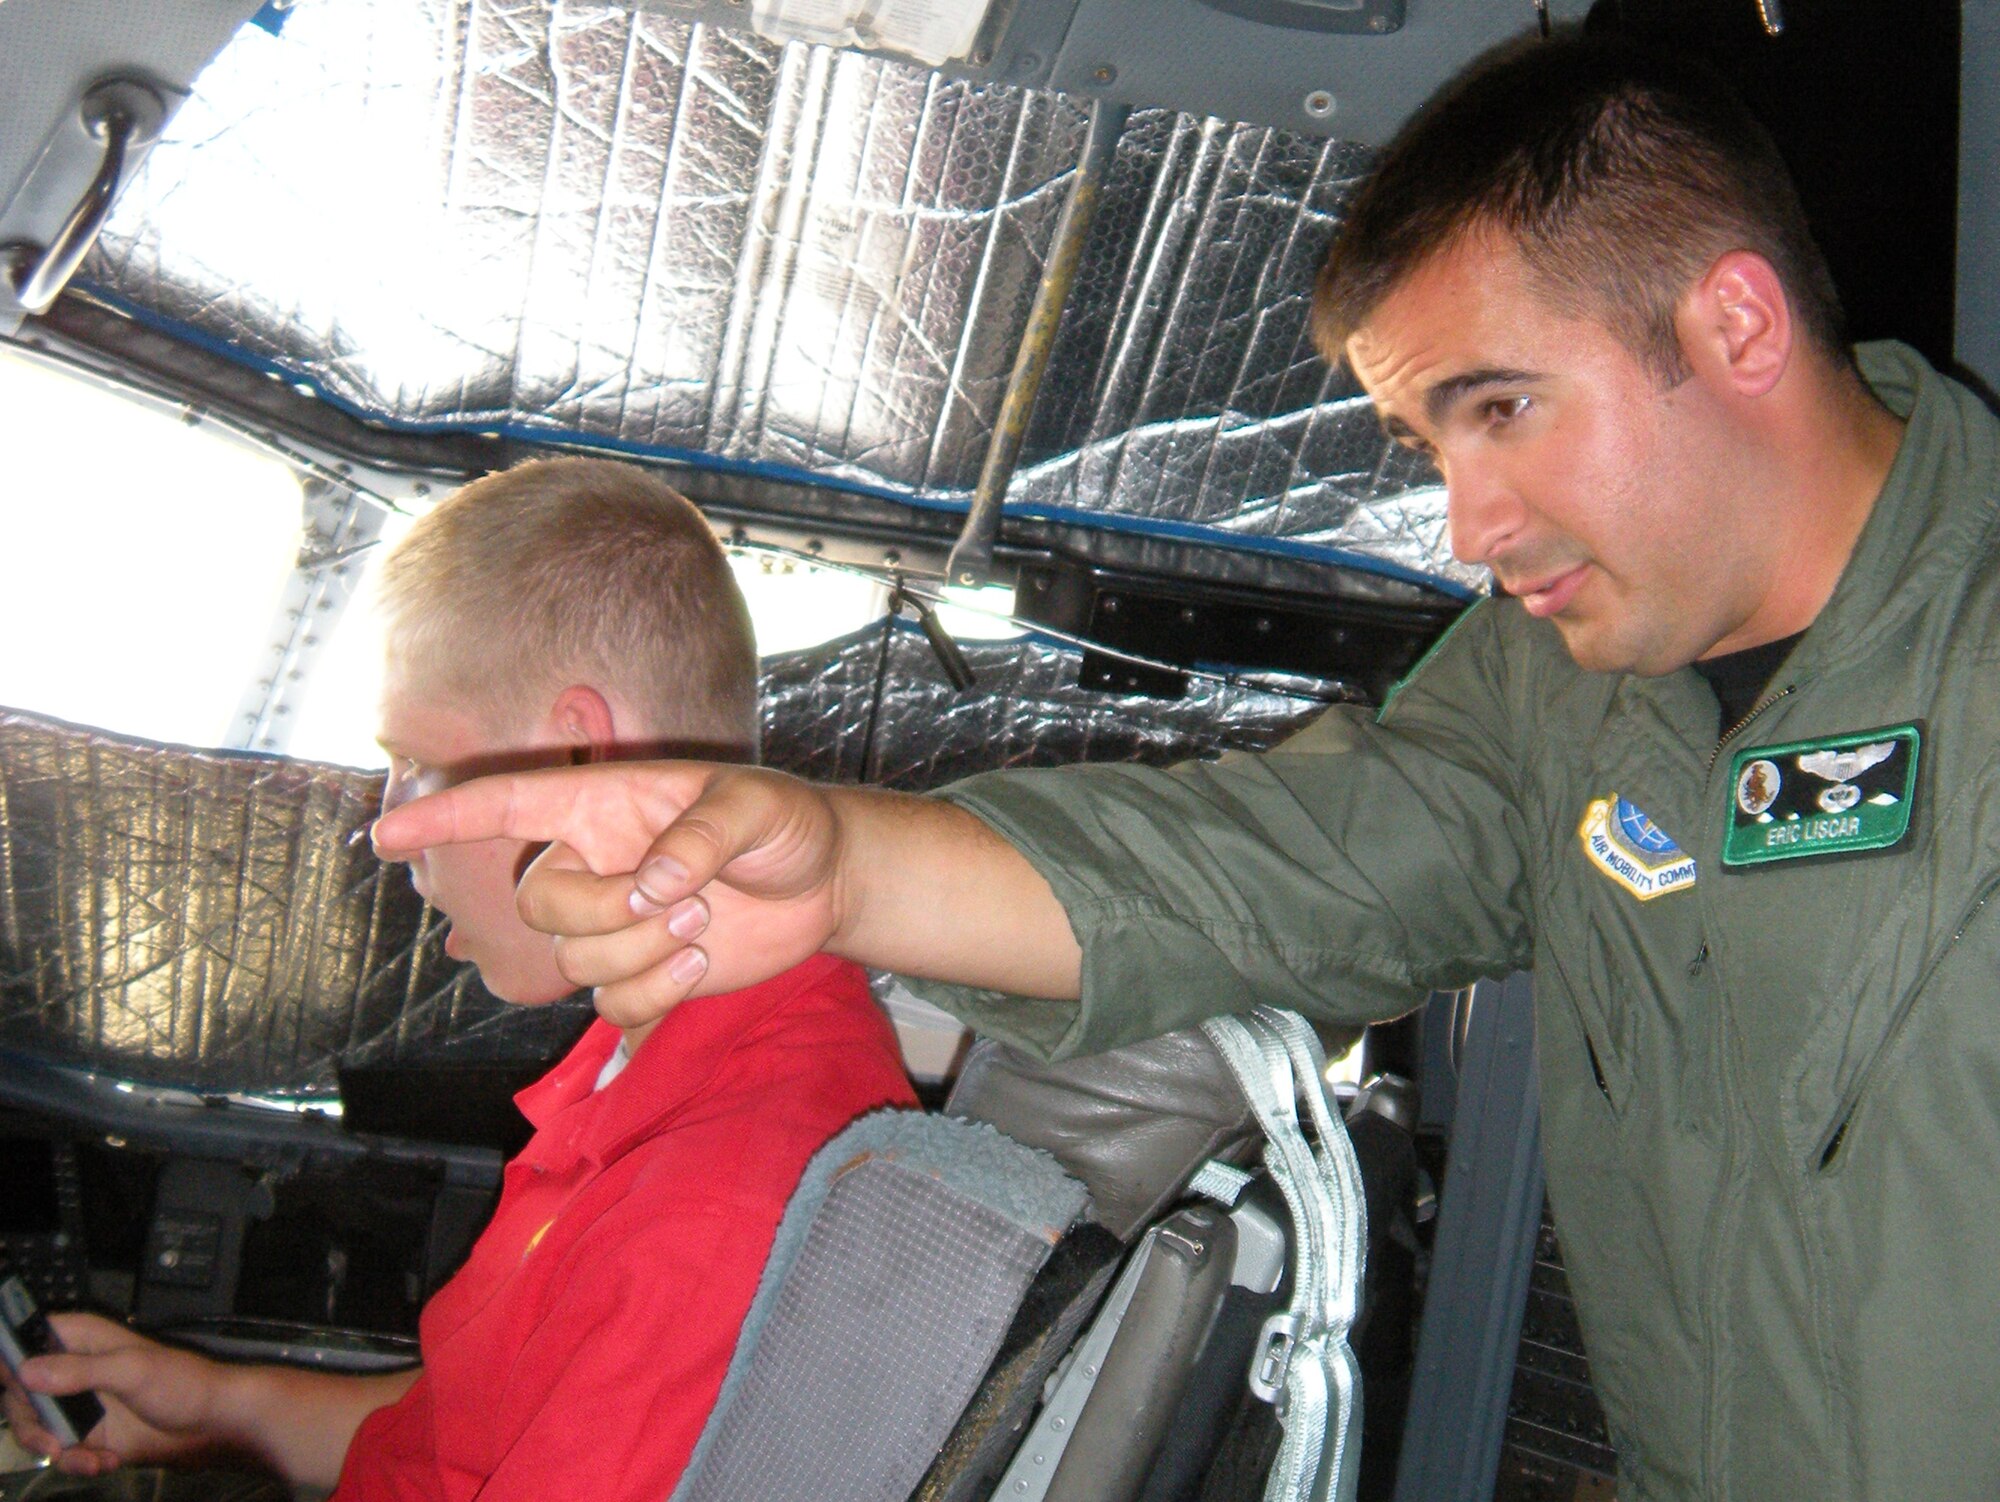 1st Lt. Eric Liscar, an Active Duty C-130 Hercules pilot, highlights different aircraft controls to members of Boy Scout Troop 65 Aug. 4 at Peterson Air Force Base, Colo. The River Forest, Ill.-based scout group visited the Air Force Reserve's 302nd Airlift Wing during their stay in Colorado Springs, Colo. The Boy Scouts were also briefed on the wing's aerial firefighting mission as the 302nd AW is the only AF Reserve organization tasked with supporting the Modular Airborne Firefighting System. Lieutenant Liscar is assigned to the 52nd Airlift Squadron, an Active Duty organization associated with the 302nd AW. (U.S. Air Force photo/Rebekah Williamson)